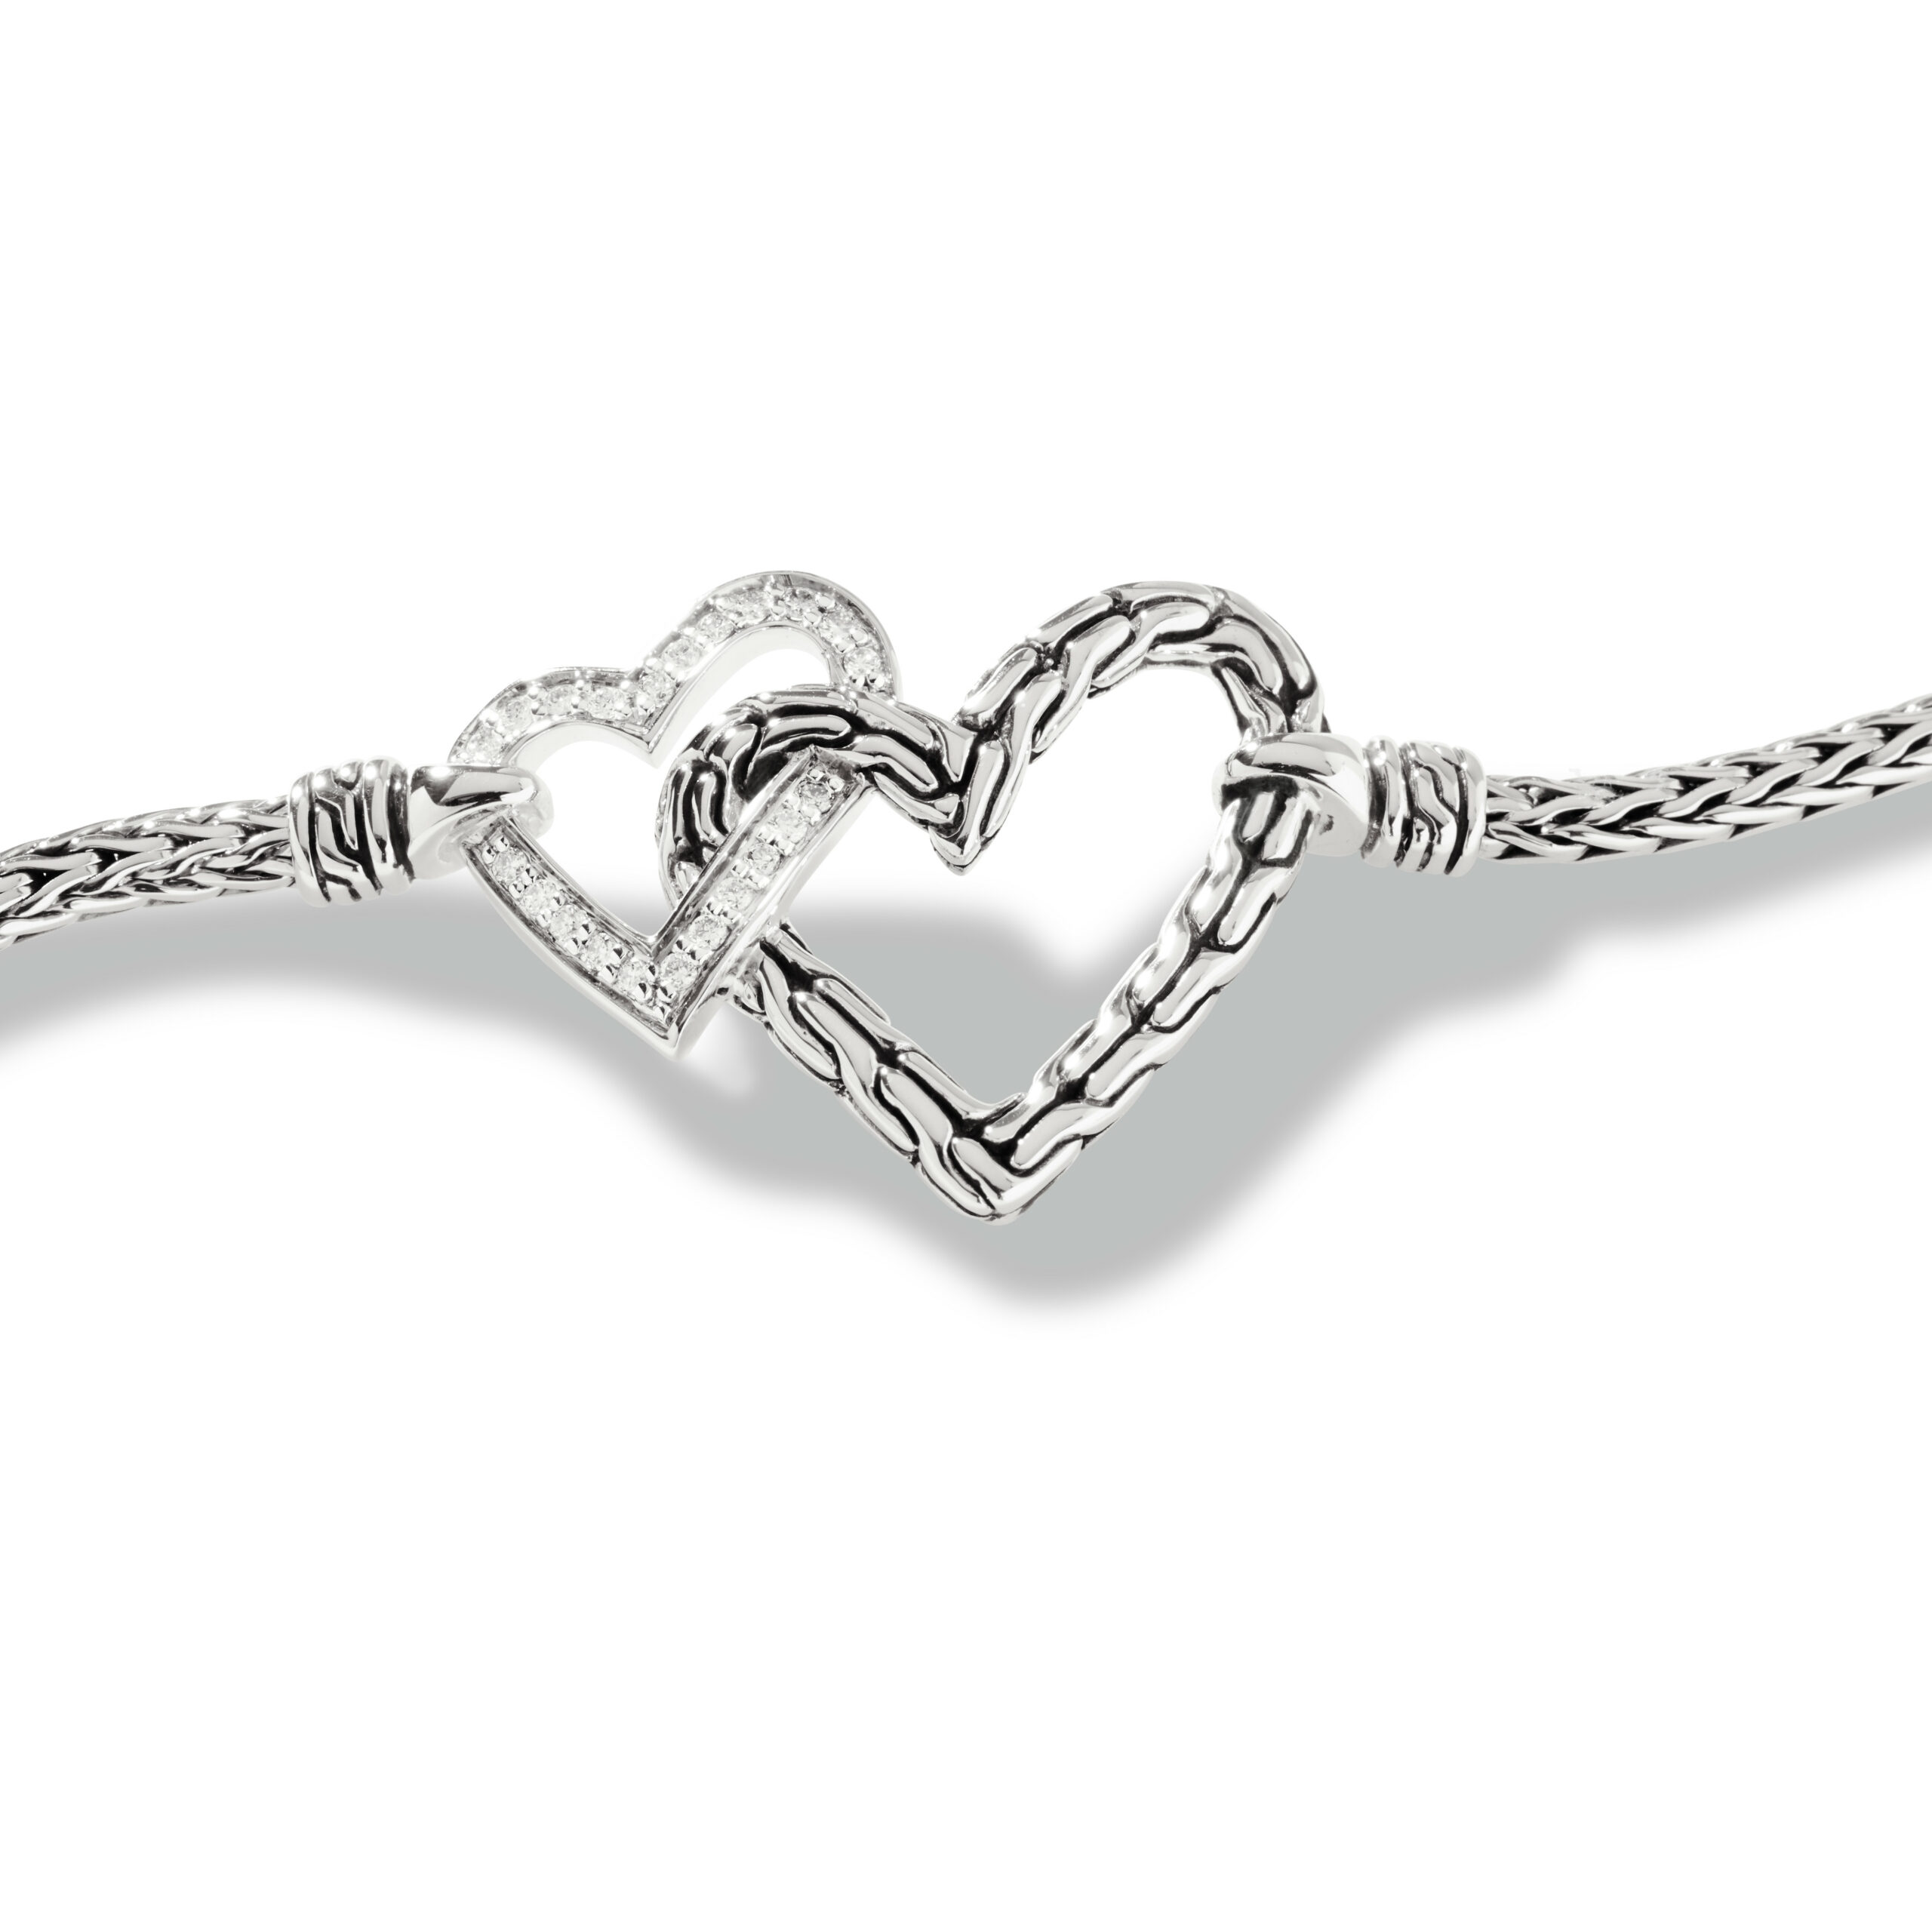 This bracelet by John Hardy is crafted from sterling silver and features 0.11 total carats of diamonds in the smaller heart.